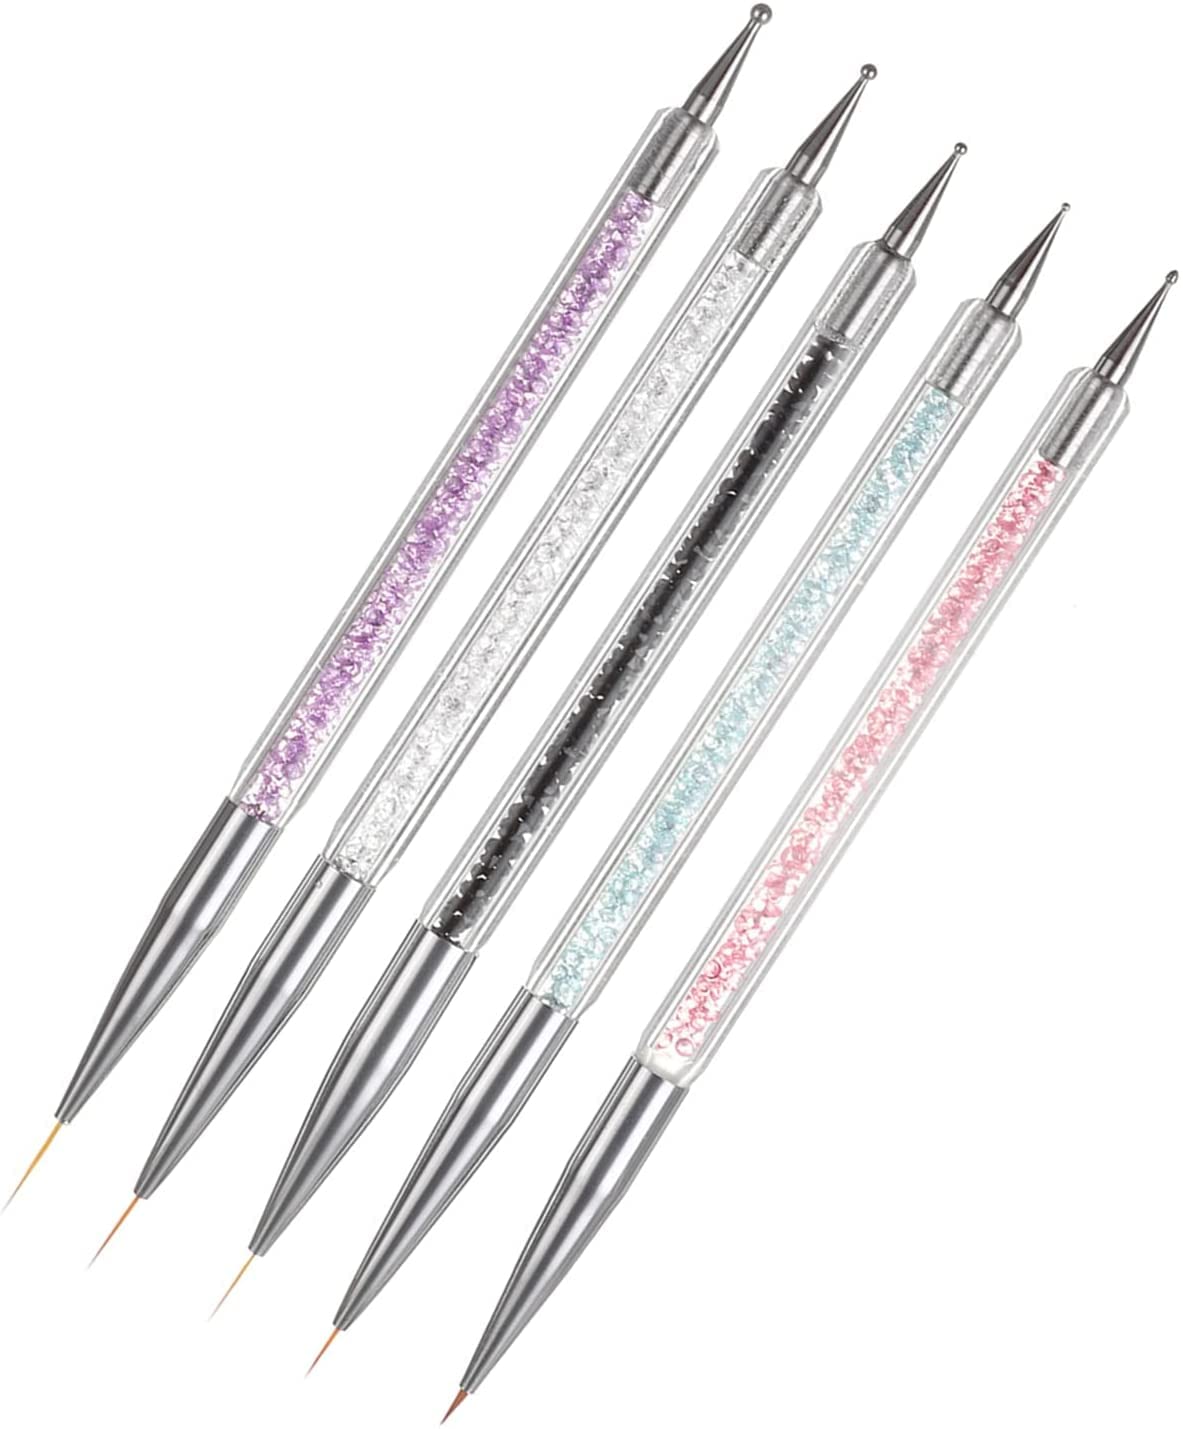 Manucurist Nail Art Tools - Double-Sided Dotting Tools (14194)